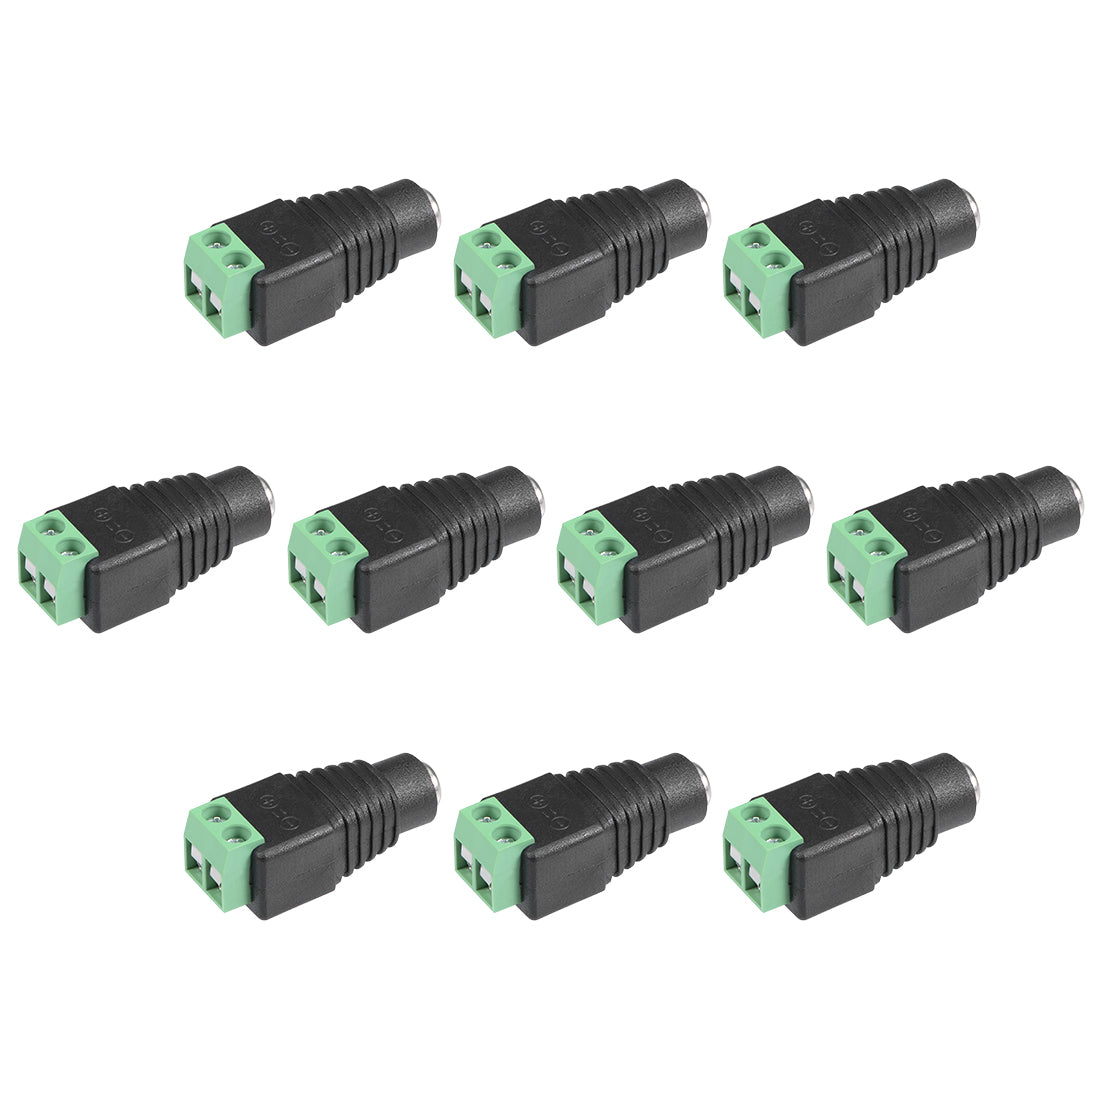 uxcell Uxcell DC Female Connector 5.5x2.1mm Power Jack Adapter 10Pcs for Led Strip CCTV Security Camera Cable Wire Ends